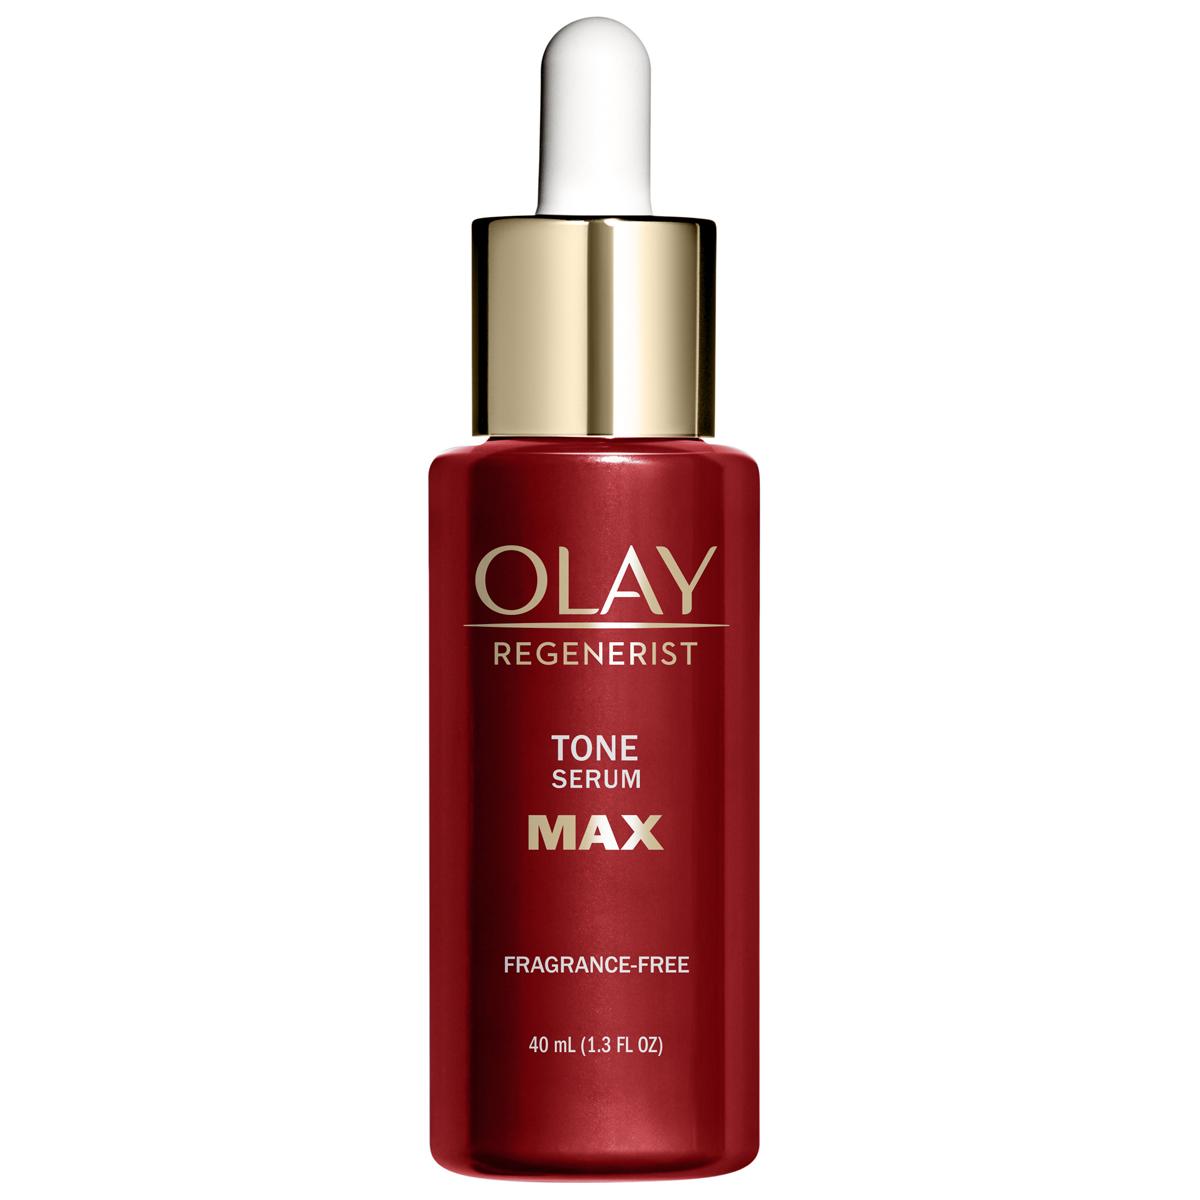 Olay Regenerist MAX Tone Serum with Vitamin C for $15.49 Shipped